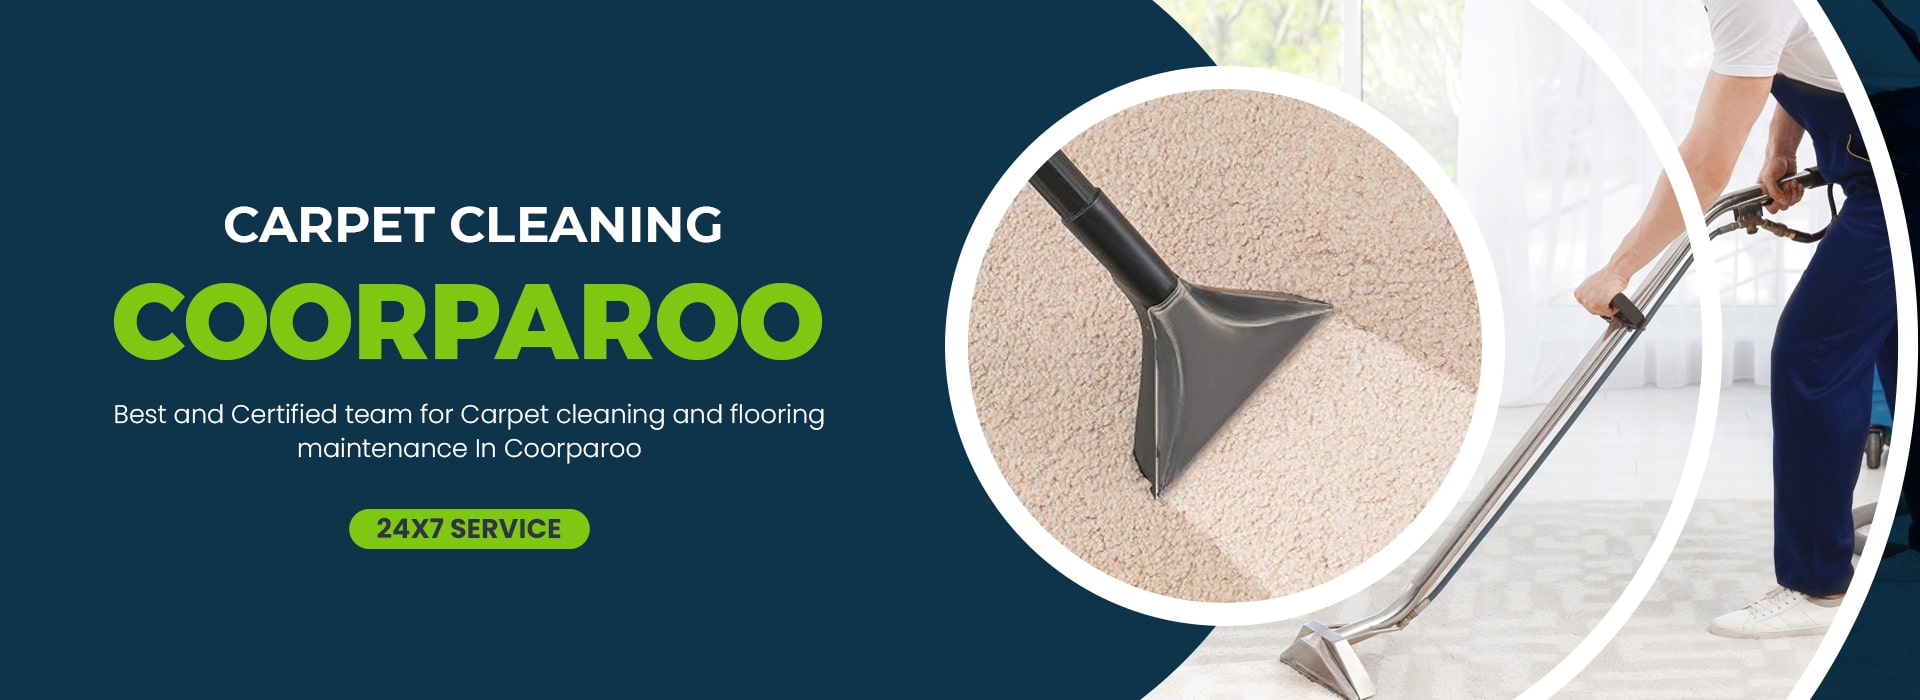 carpet cleaning coorparoo 